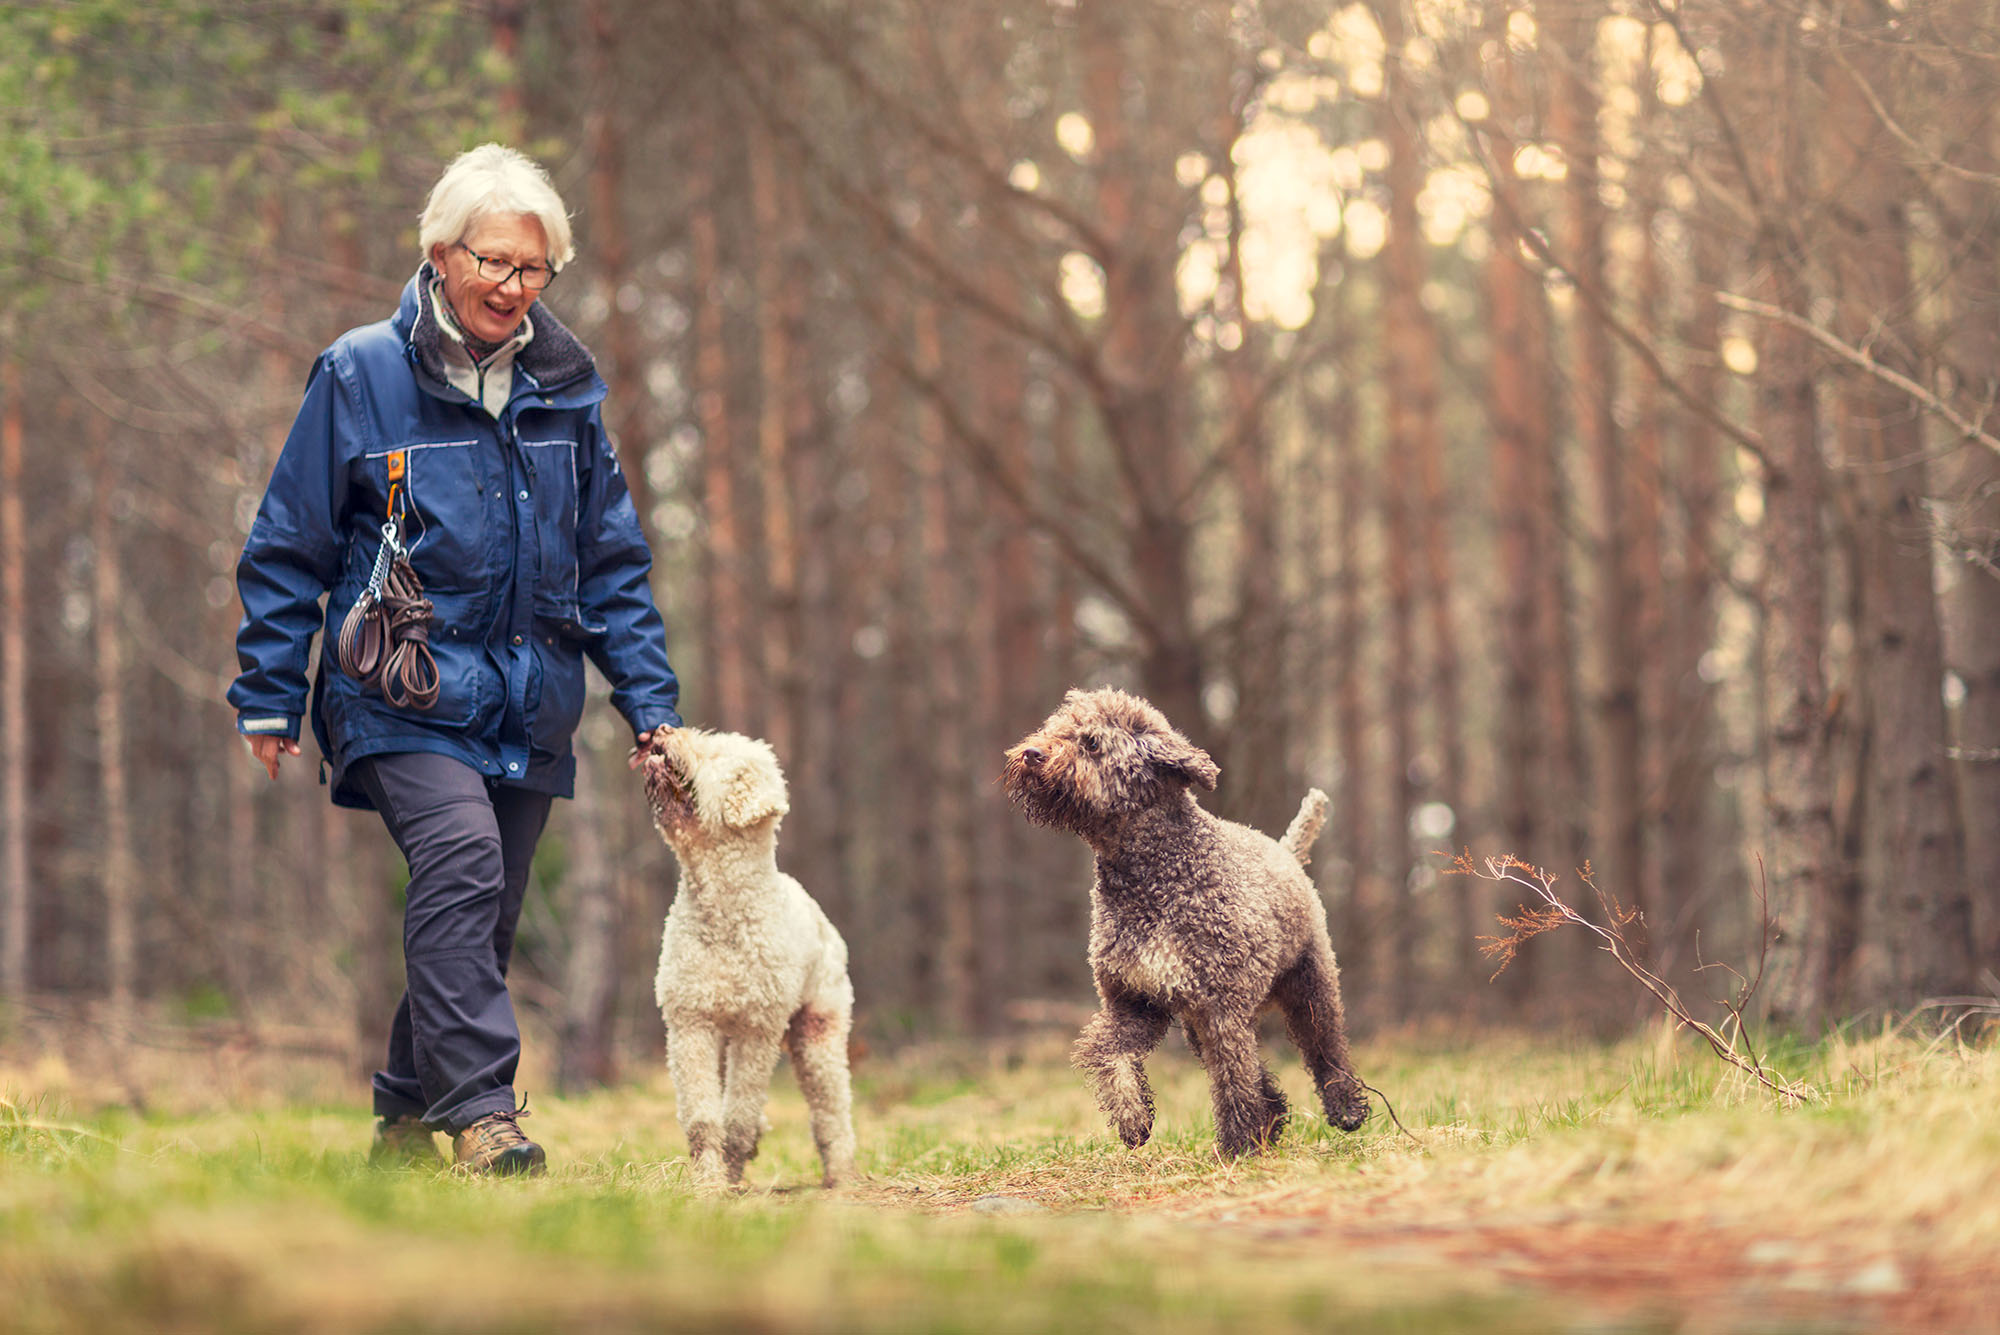 Photo of an older woman out walking with two playful poodle-breed dogs walking through a forest on a spring day. The woman has silver white hair and glasses and wears a blue hiking jacket, hiking pants, and hiking boots as two poodle dogs, one brown and one white, run next to her.